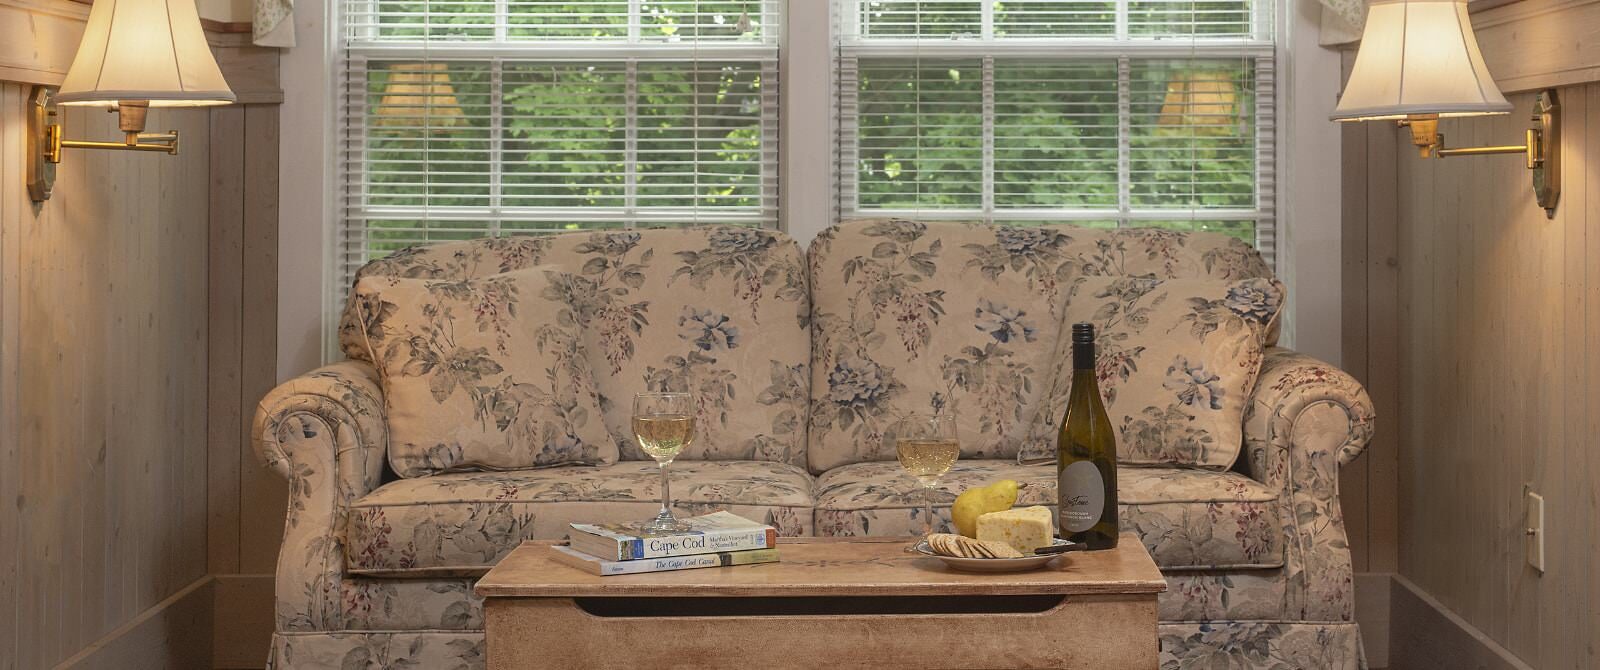 Floral upholstered loveseat and coffee table with Cape Cod books, wine filled glasses, and plate with cheese, crackers, and a pear